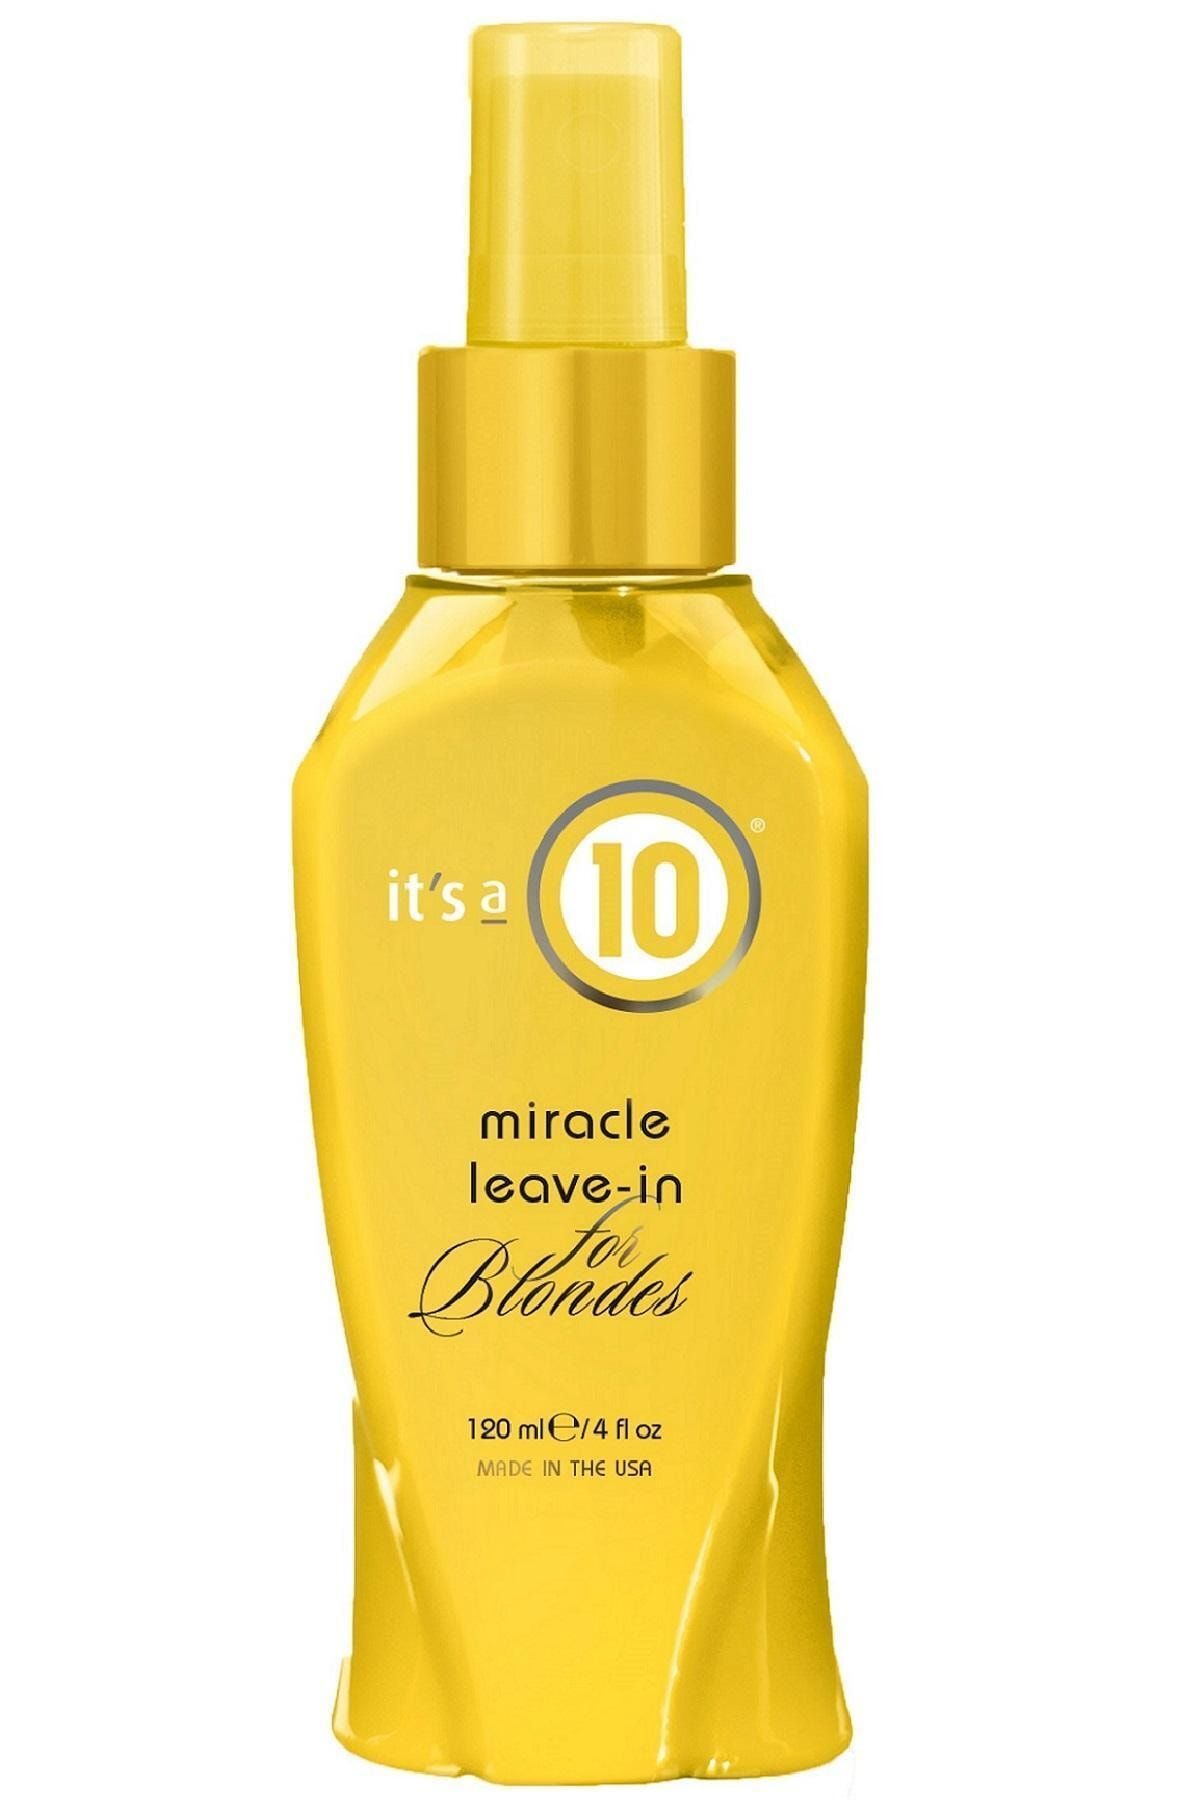 it's a 10 Miracle Leave-in For Blondes - 120 ml